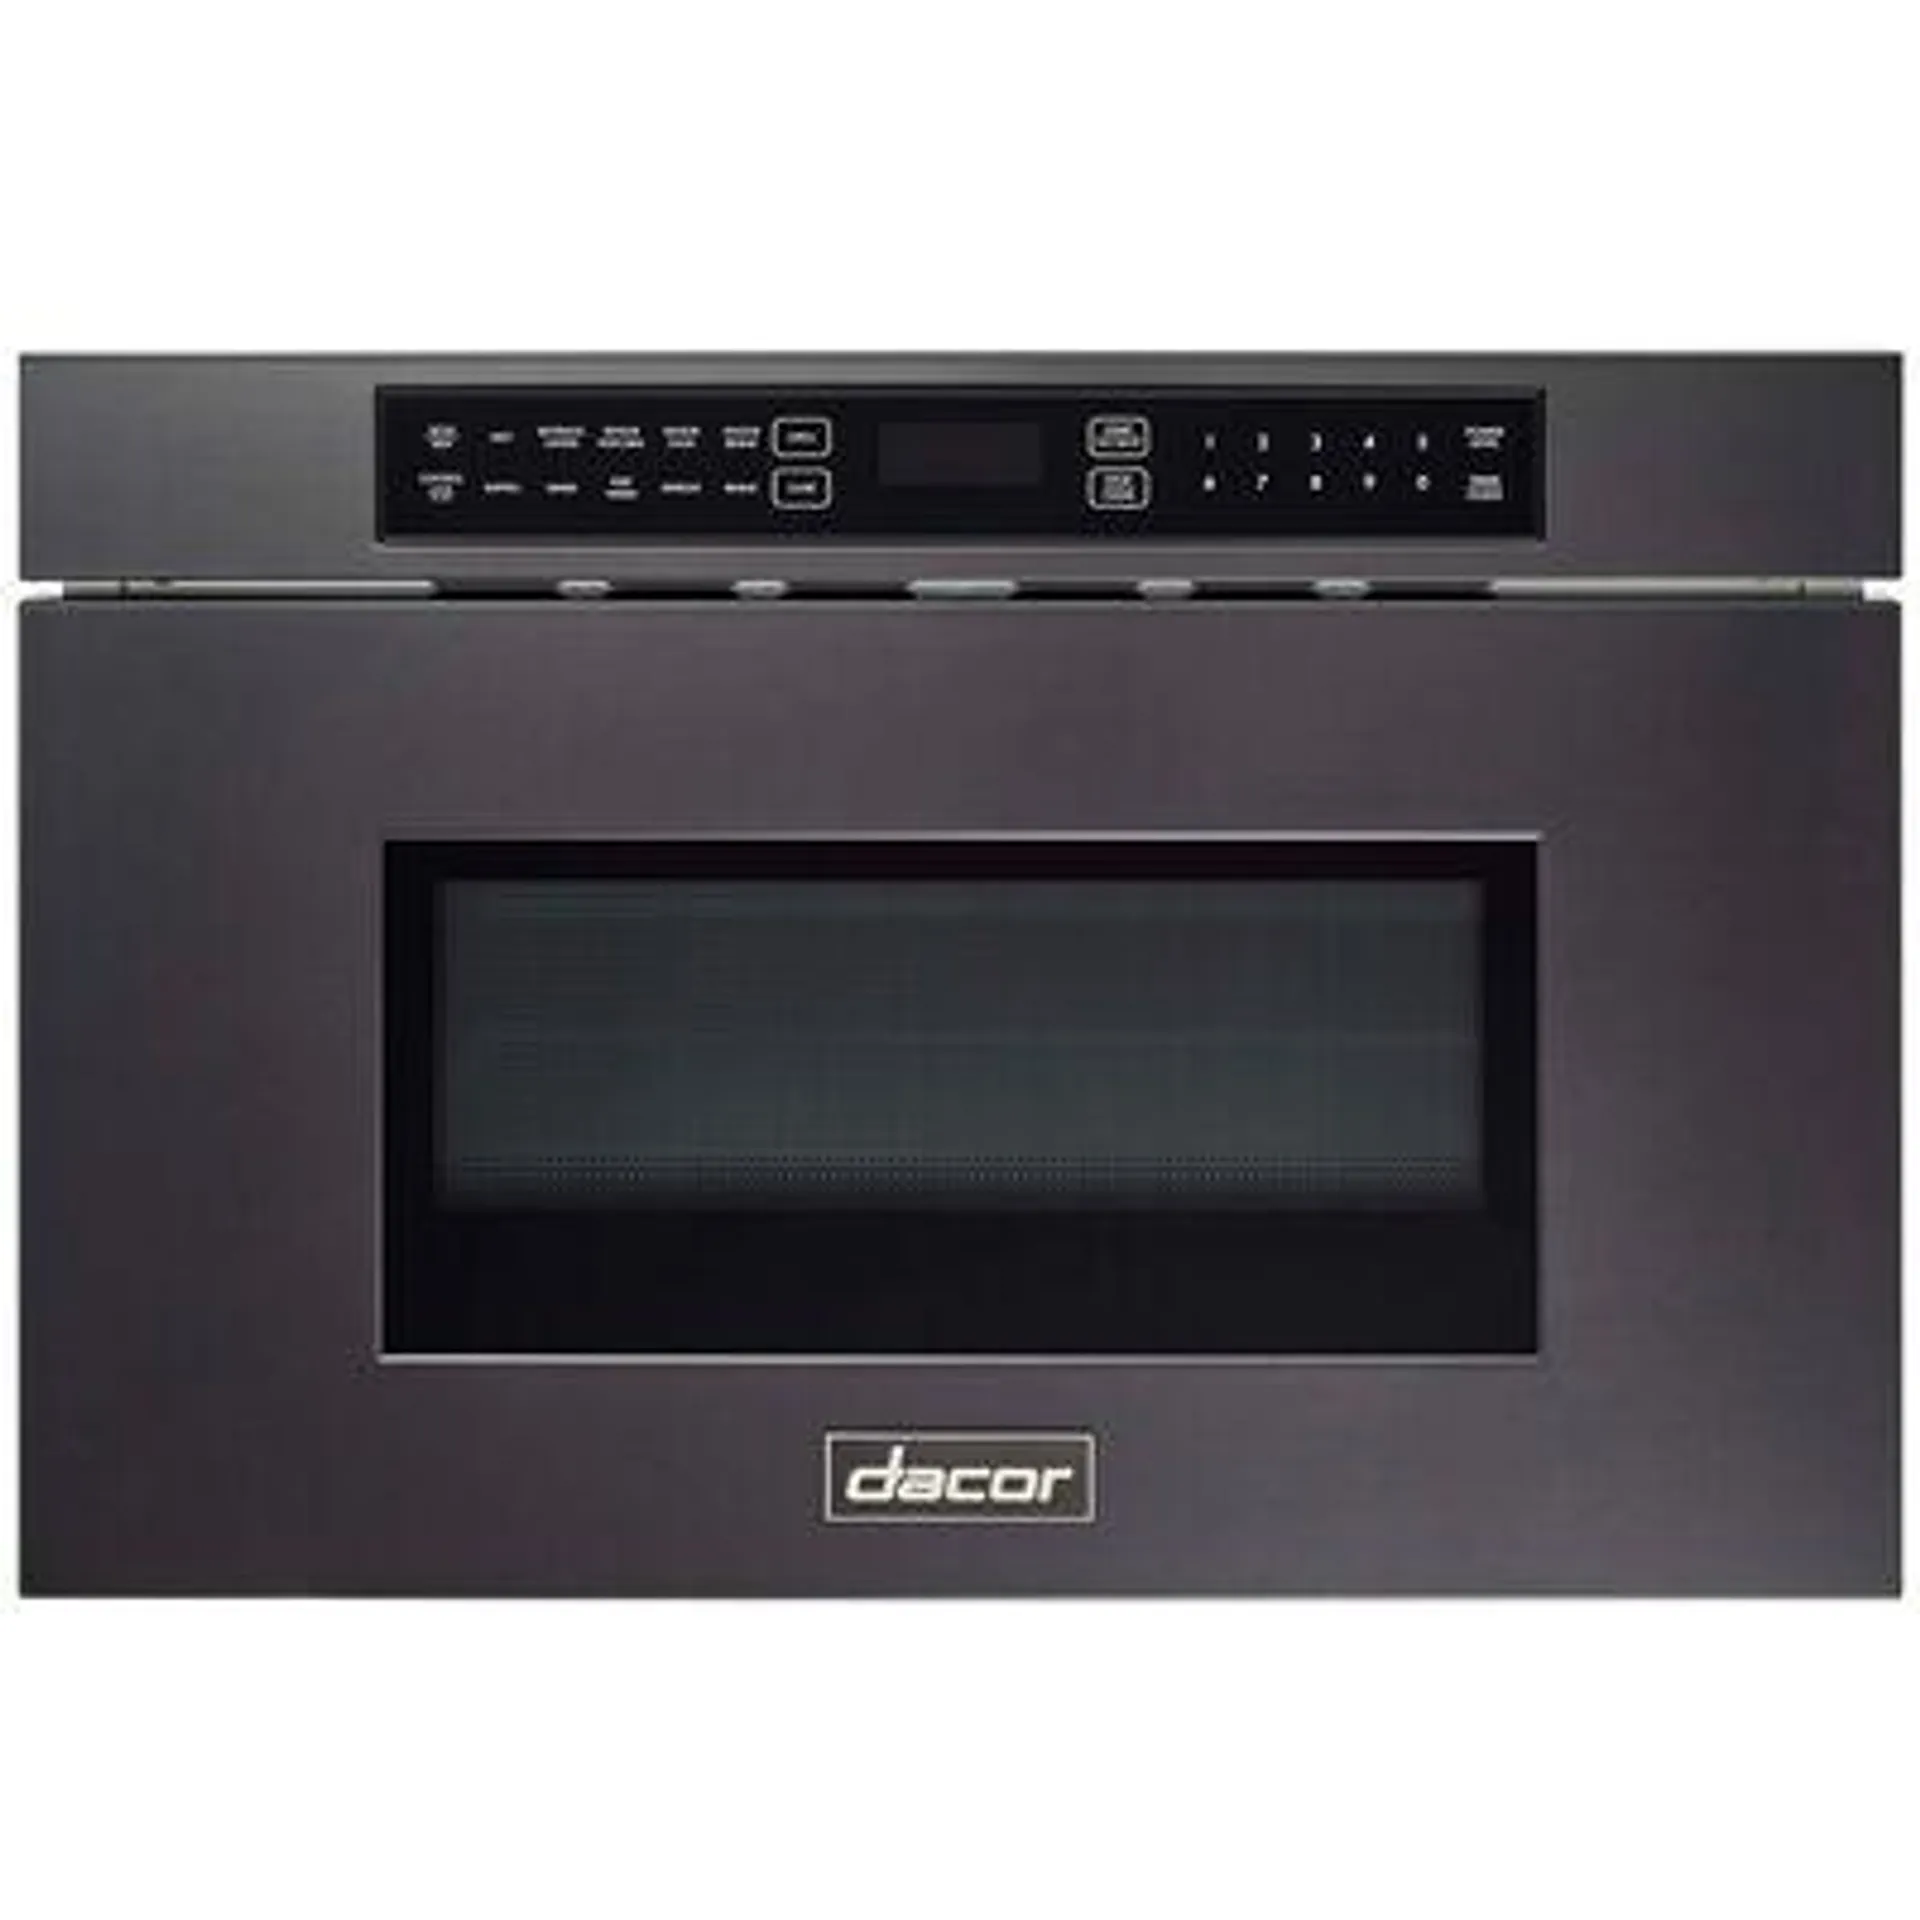 Dacor 24 in. 1.2 cu. ft. Drawer Microwave with 11 Power Levels & Sensor Cooking Controls - Graphite Stainless